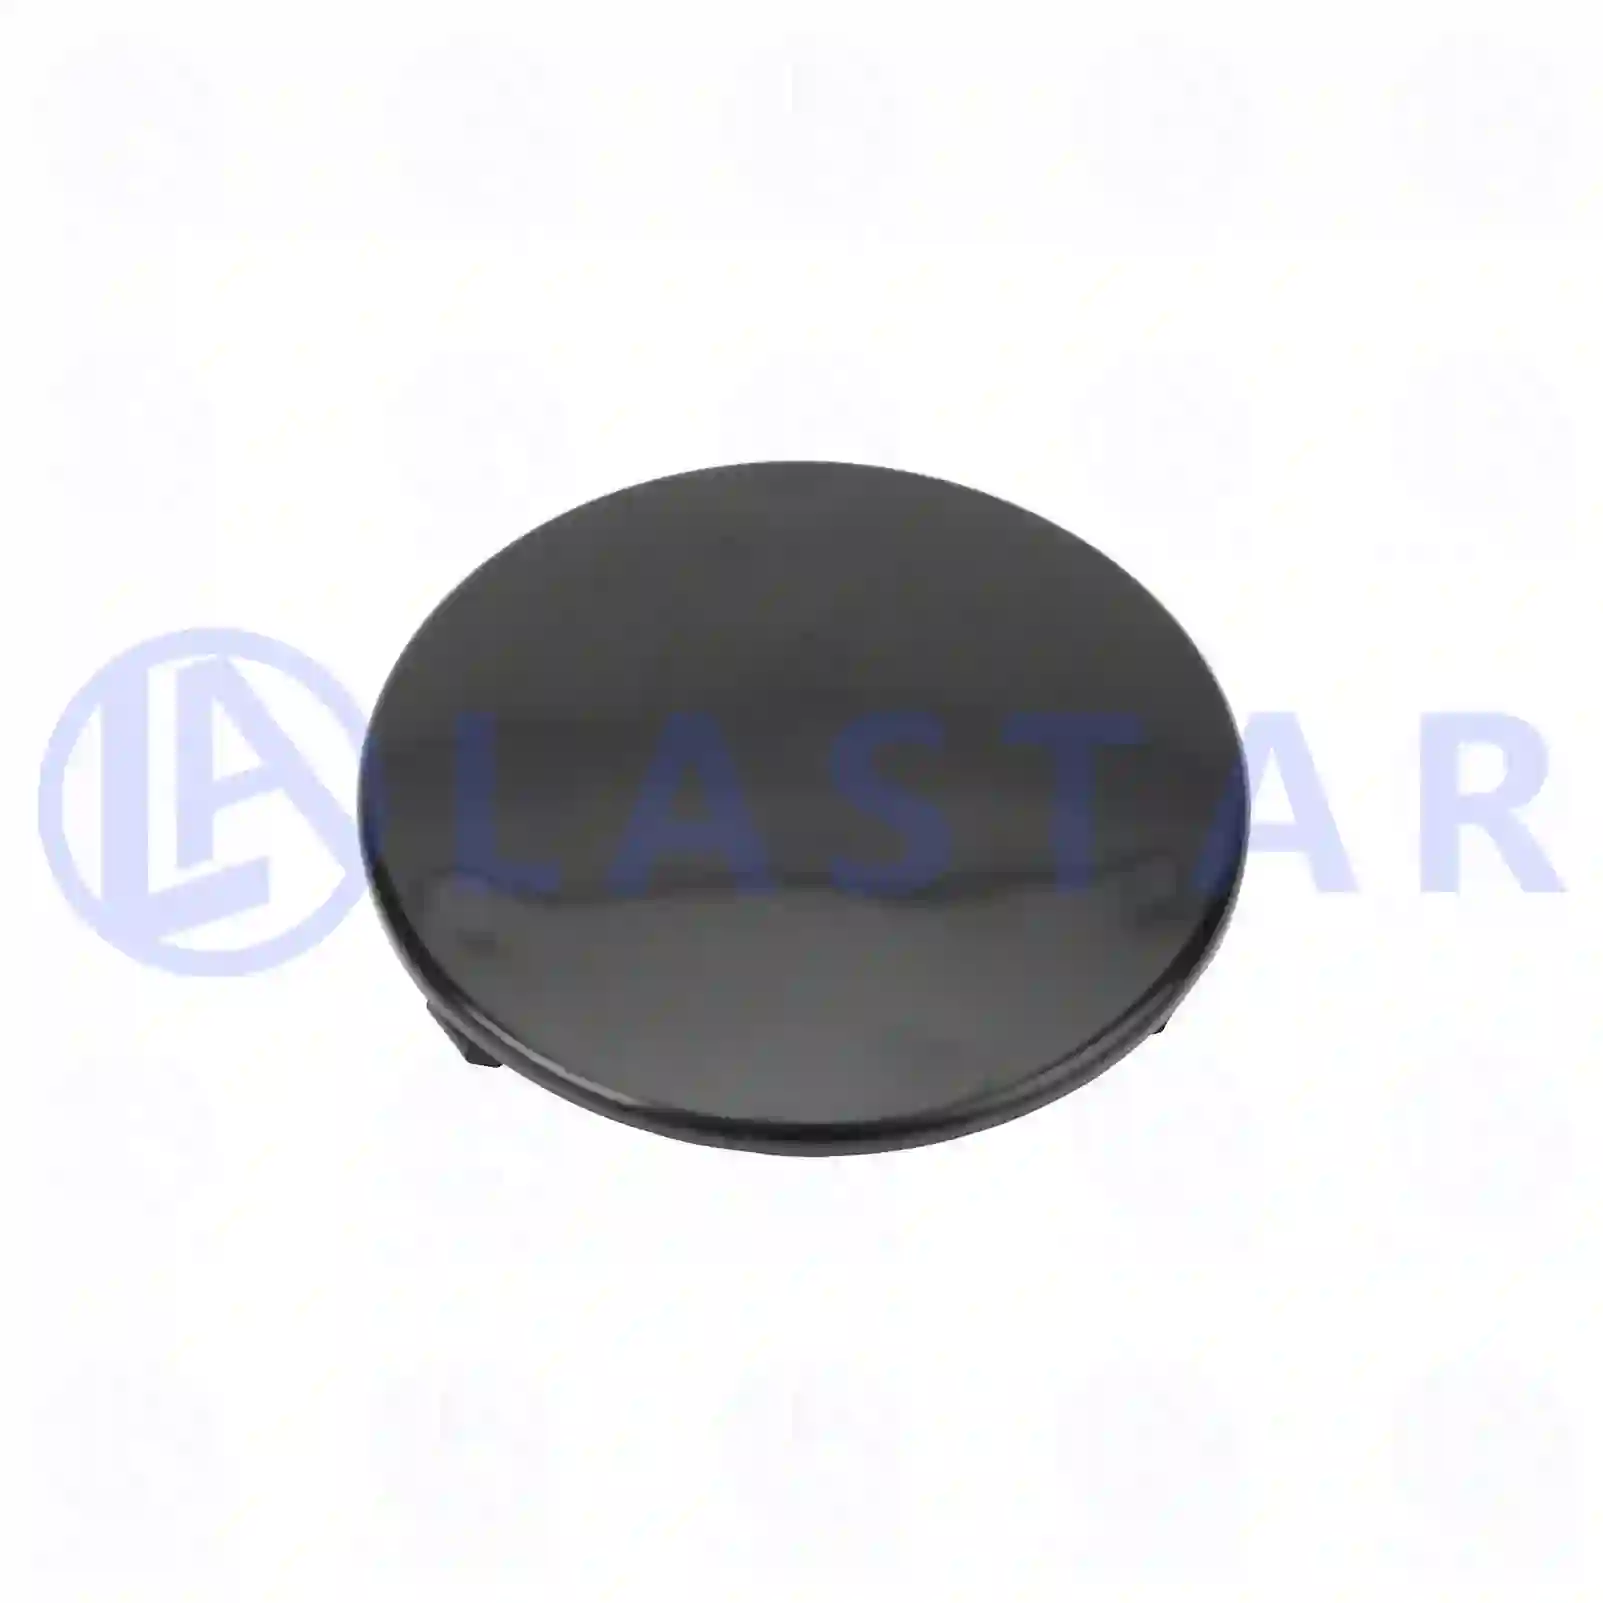  Cover, front grill || Lastar Spare Part | Truck Spare Parts, Auotomotive Spare Parts